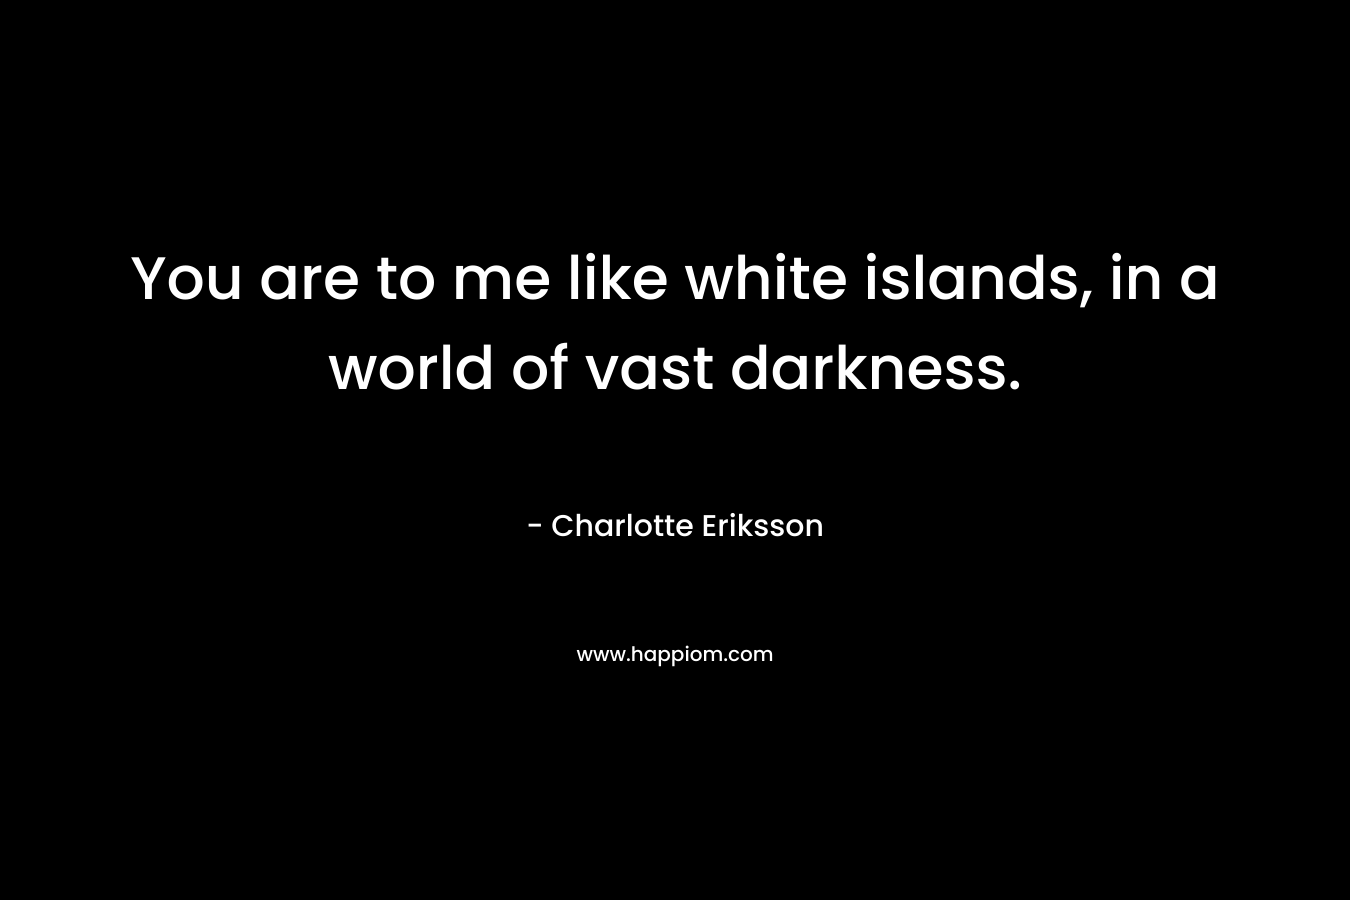 You are to me like white islands, in a world of vast darkness. – Charlotte Eriksson